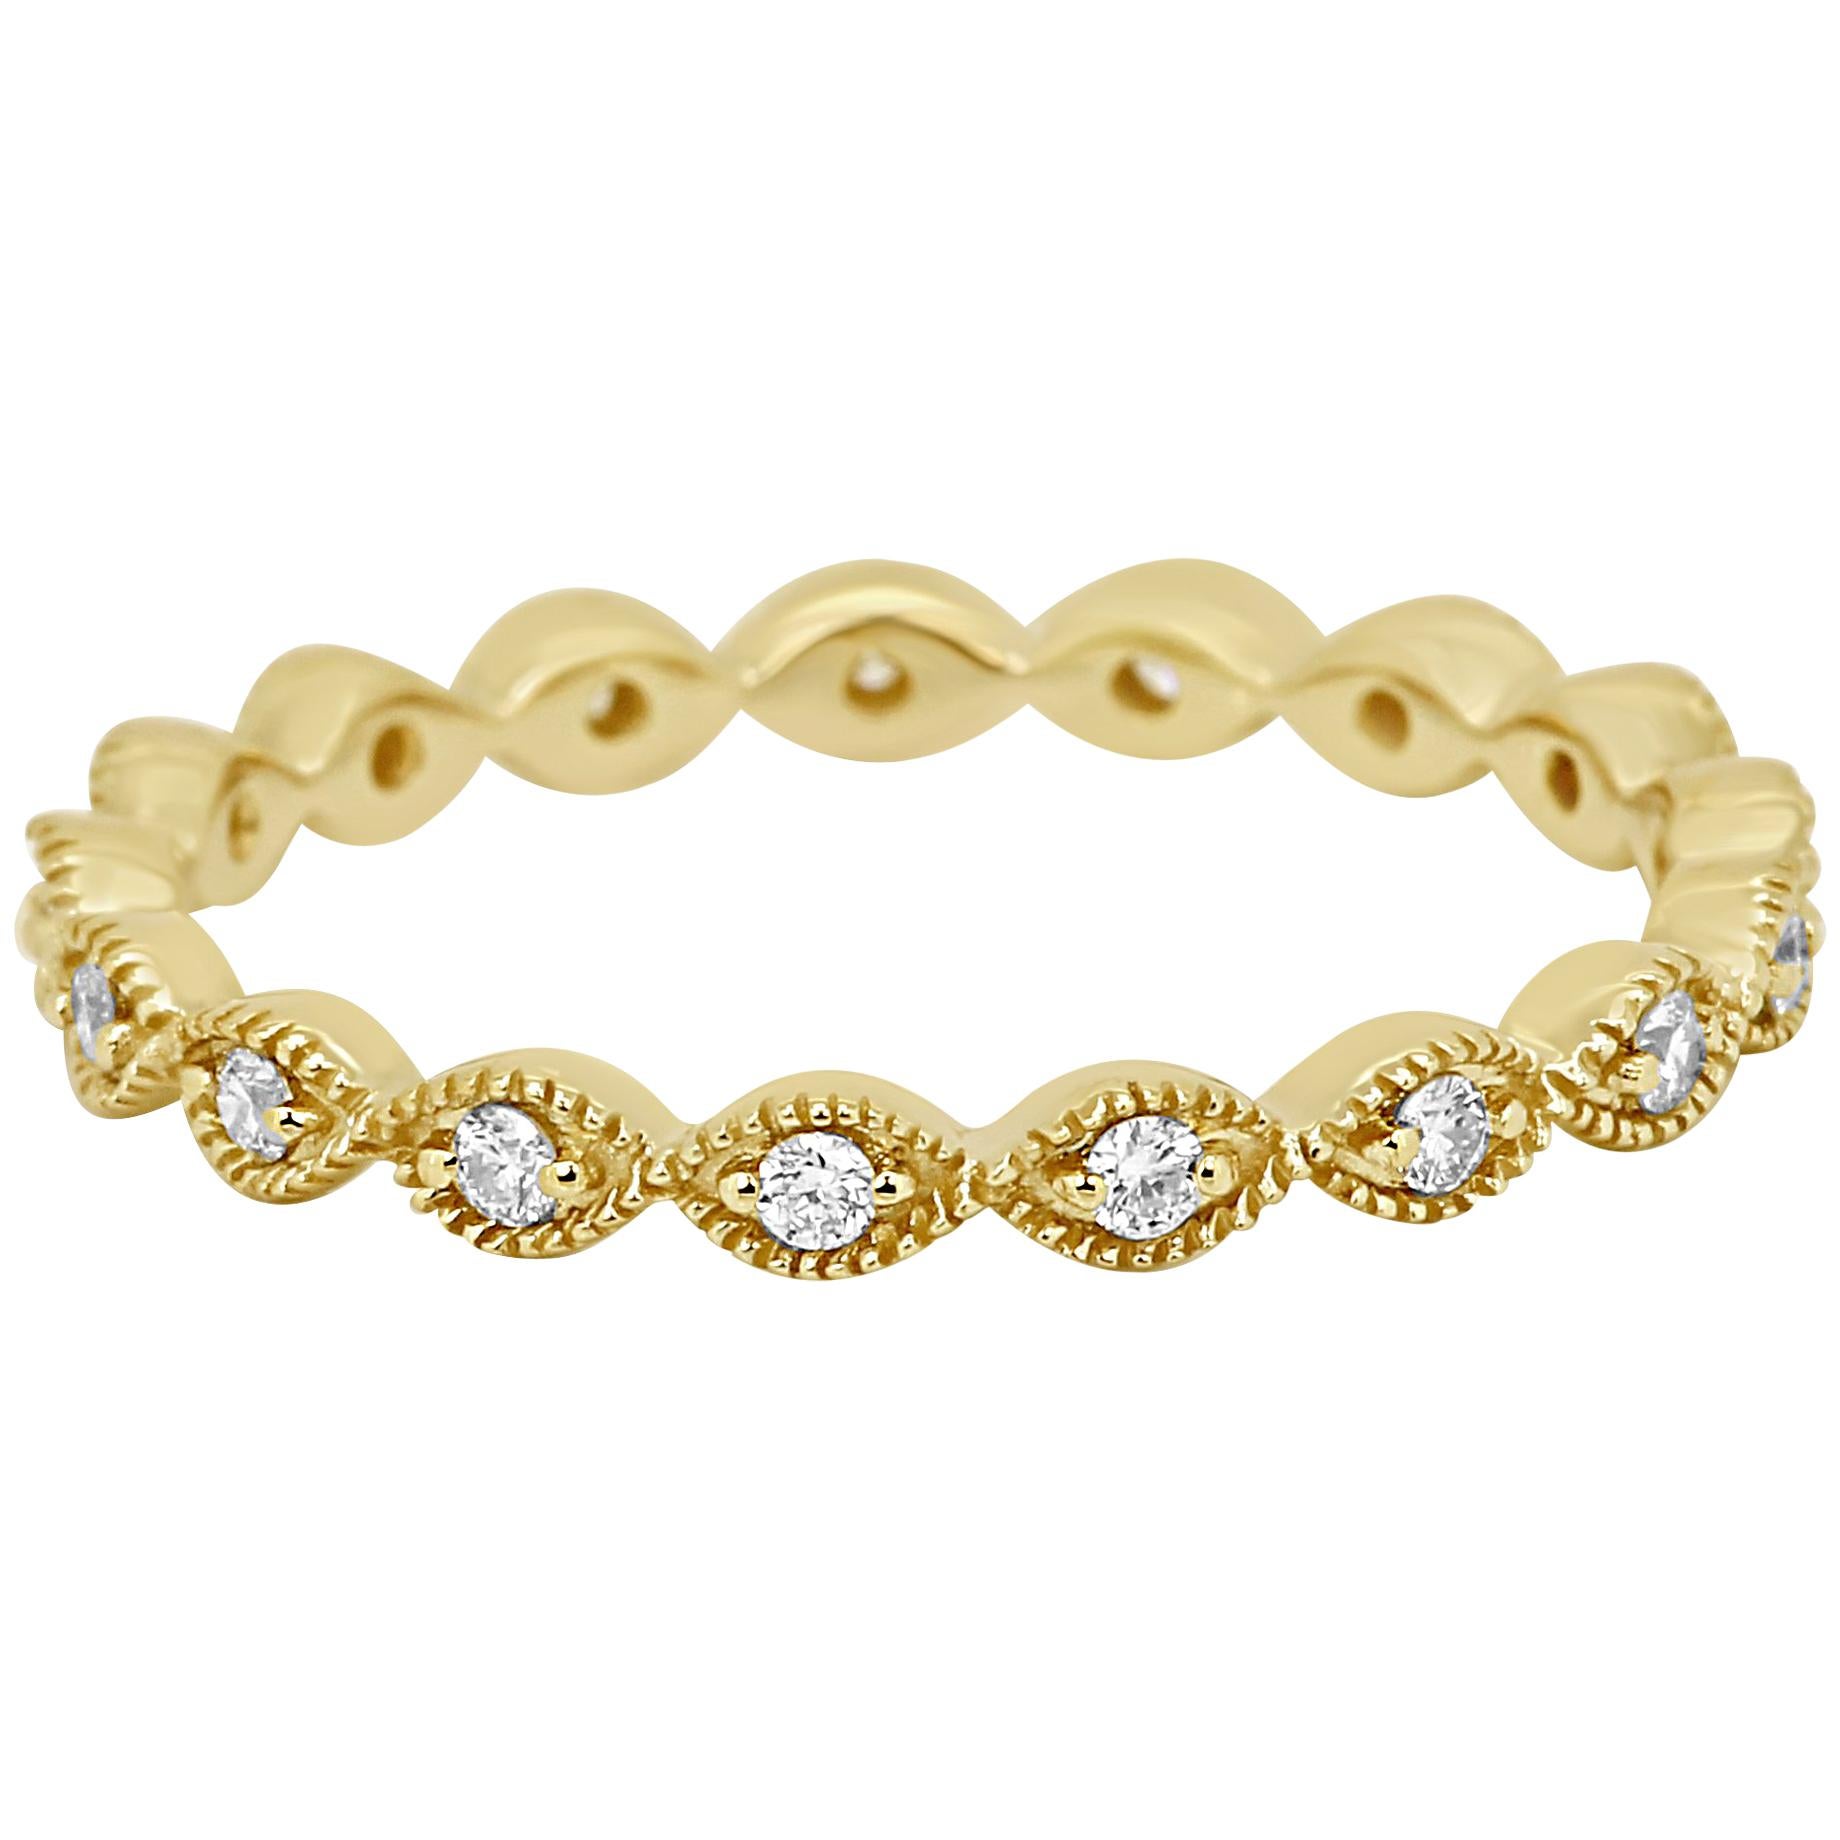 White Diamond Rounds Milgrain Gold Eternity Band Fashion Stackable Cocktail Ring